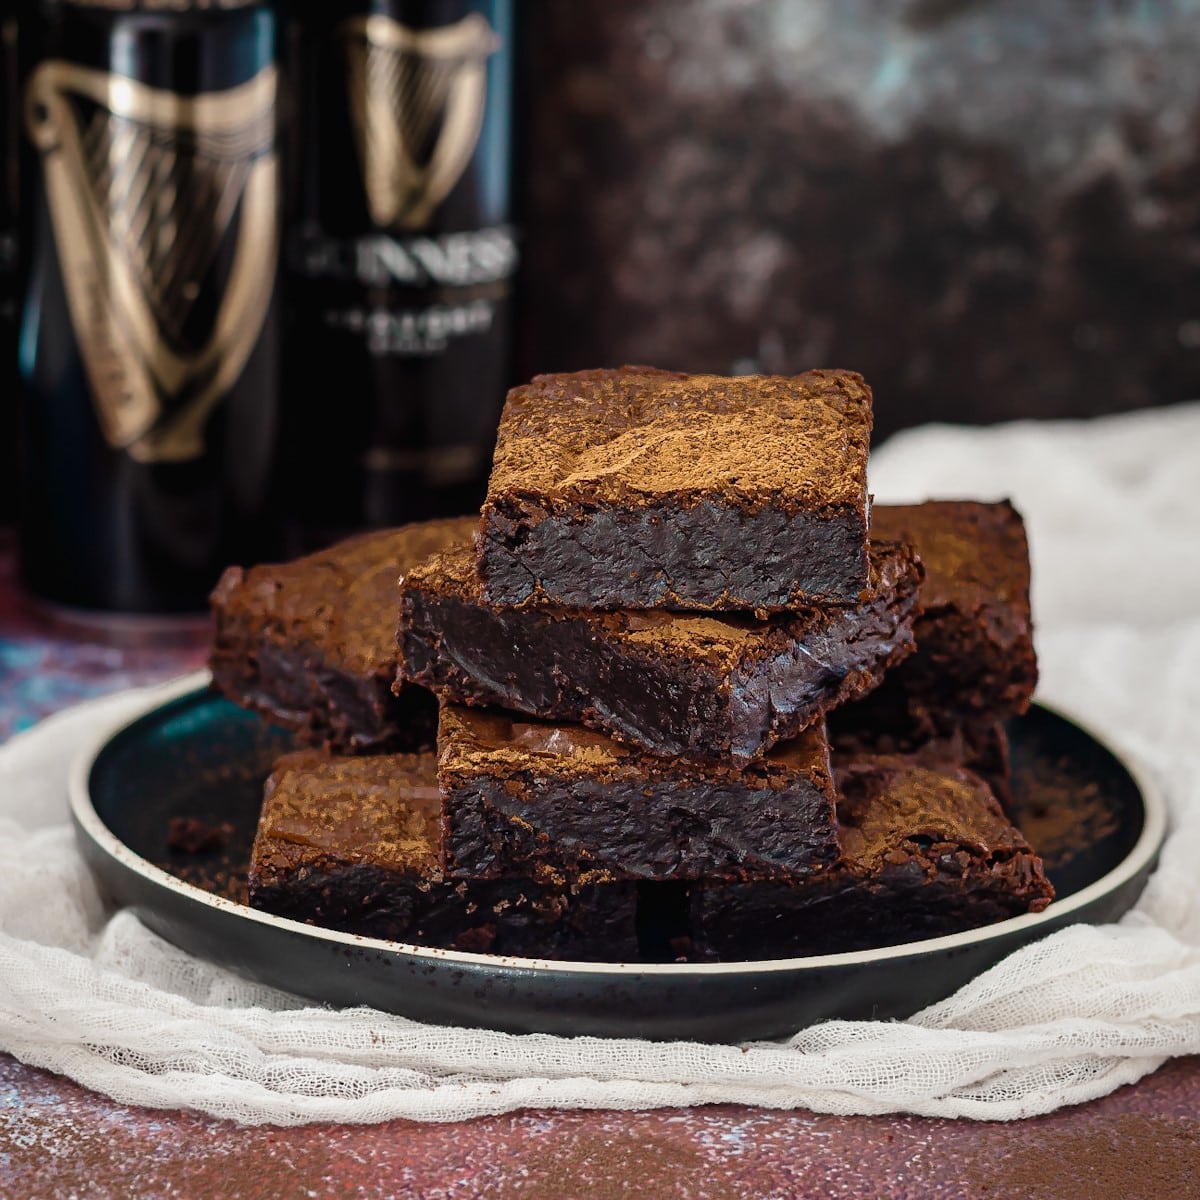 Guinness stout chocolate brownies stacked on a plate in front of guinness beer cans.